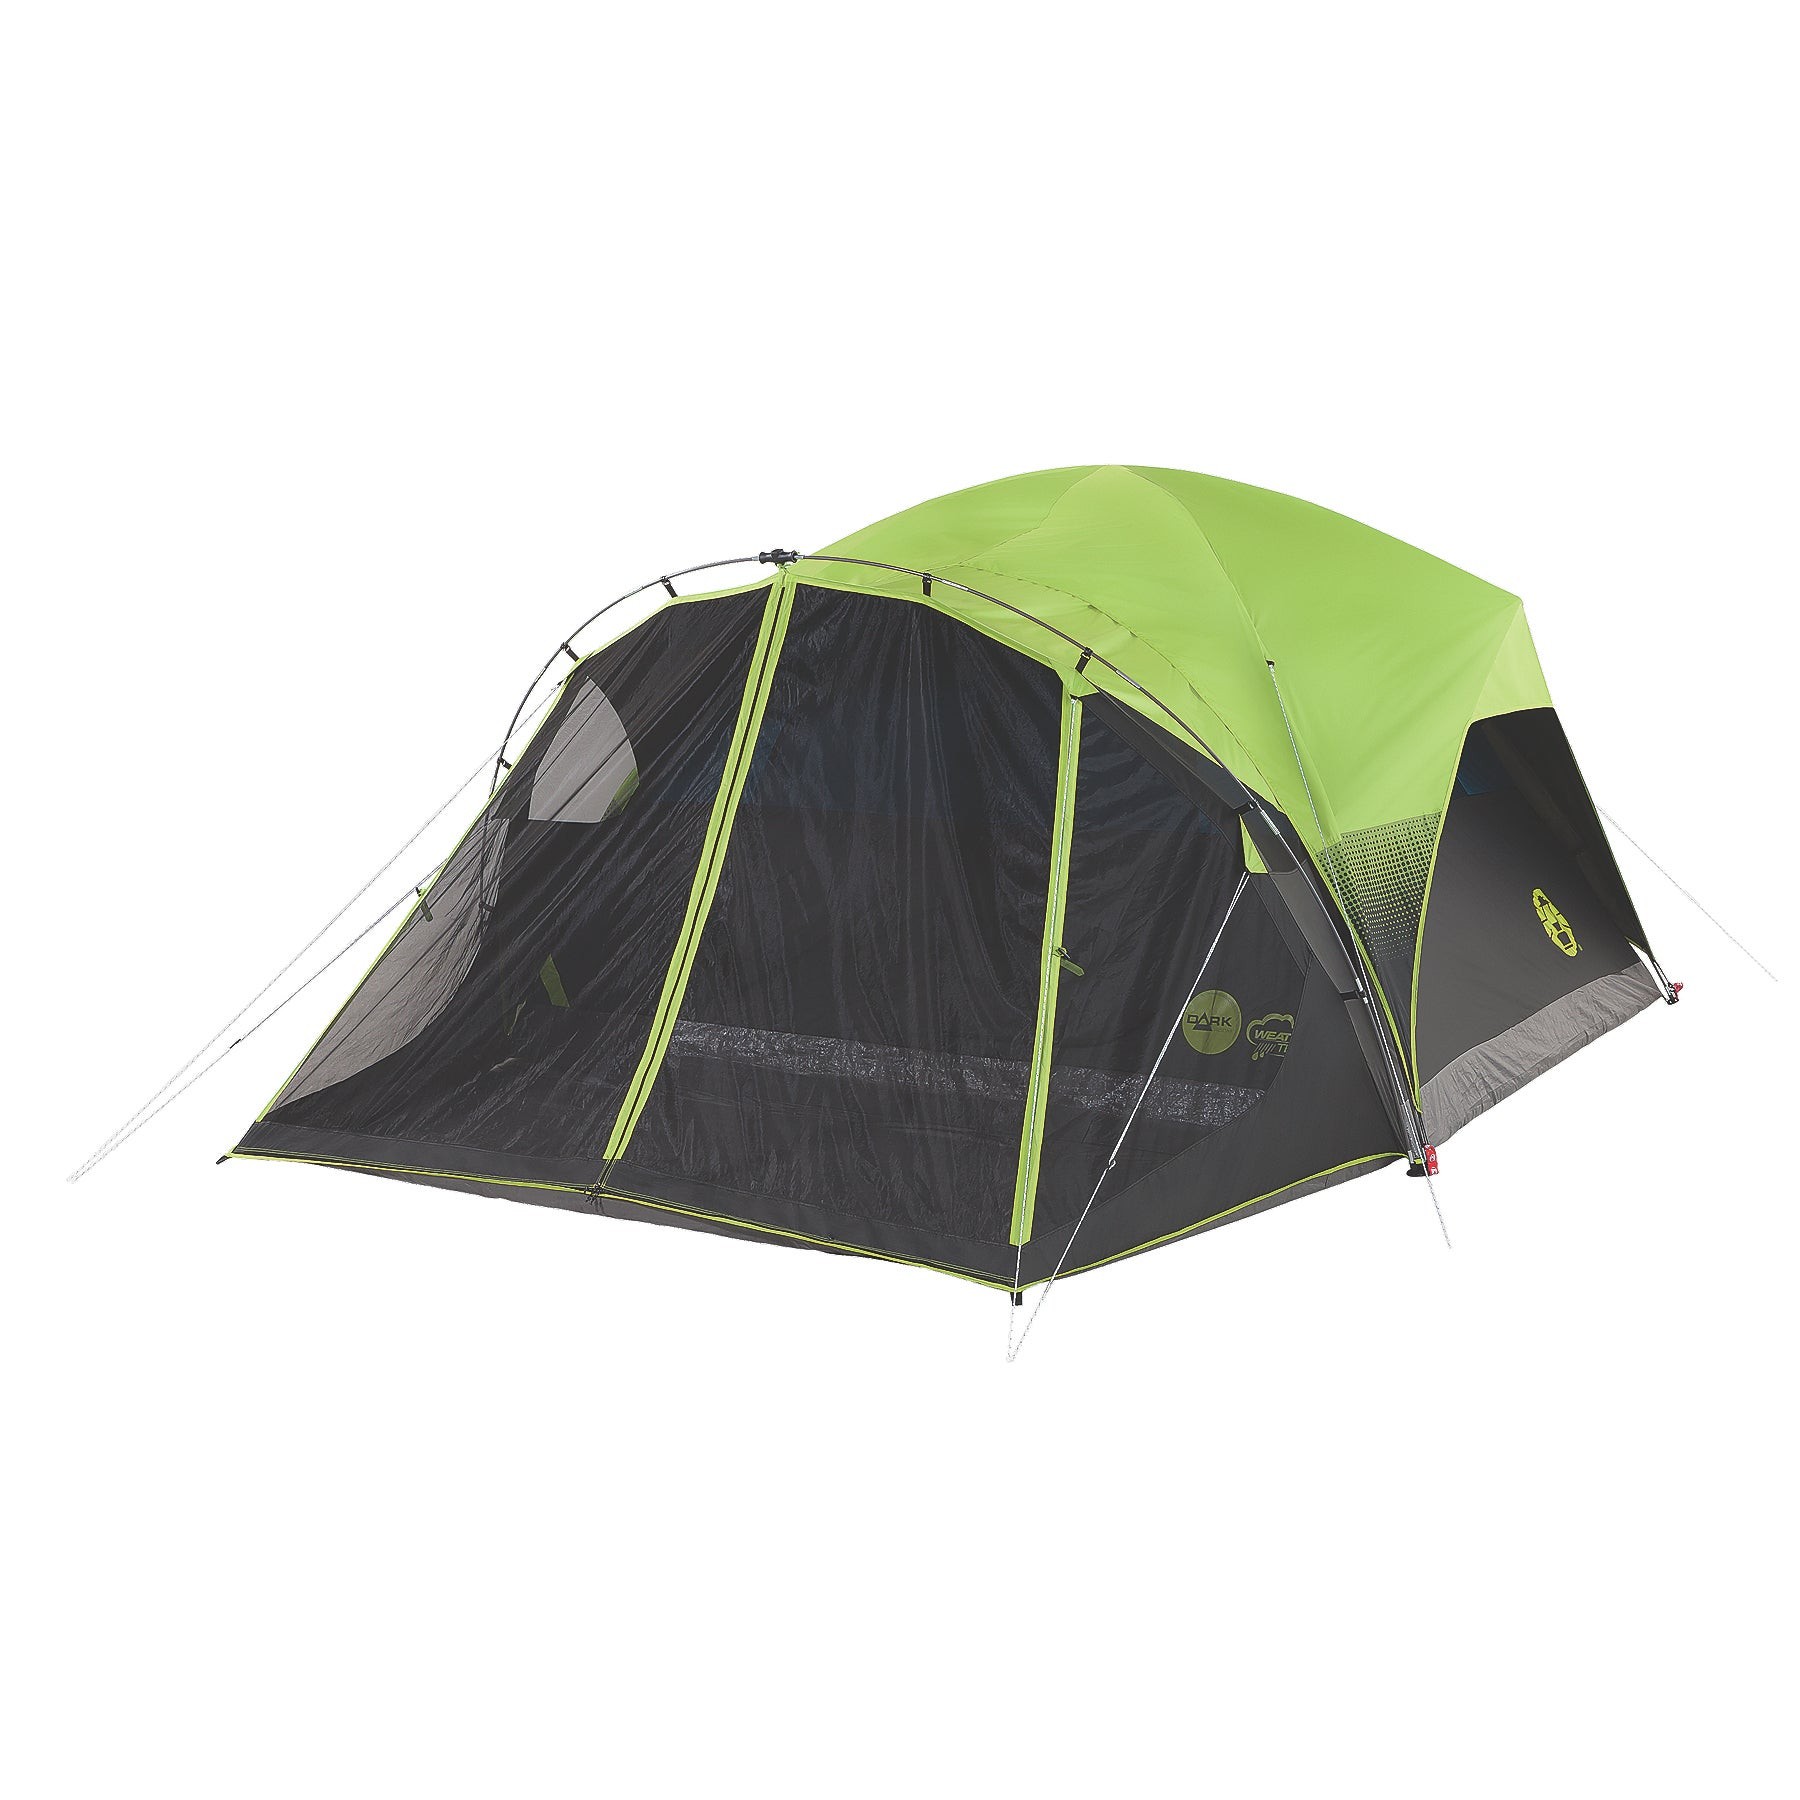 6-Person Dark Room Fast Pitch Tent